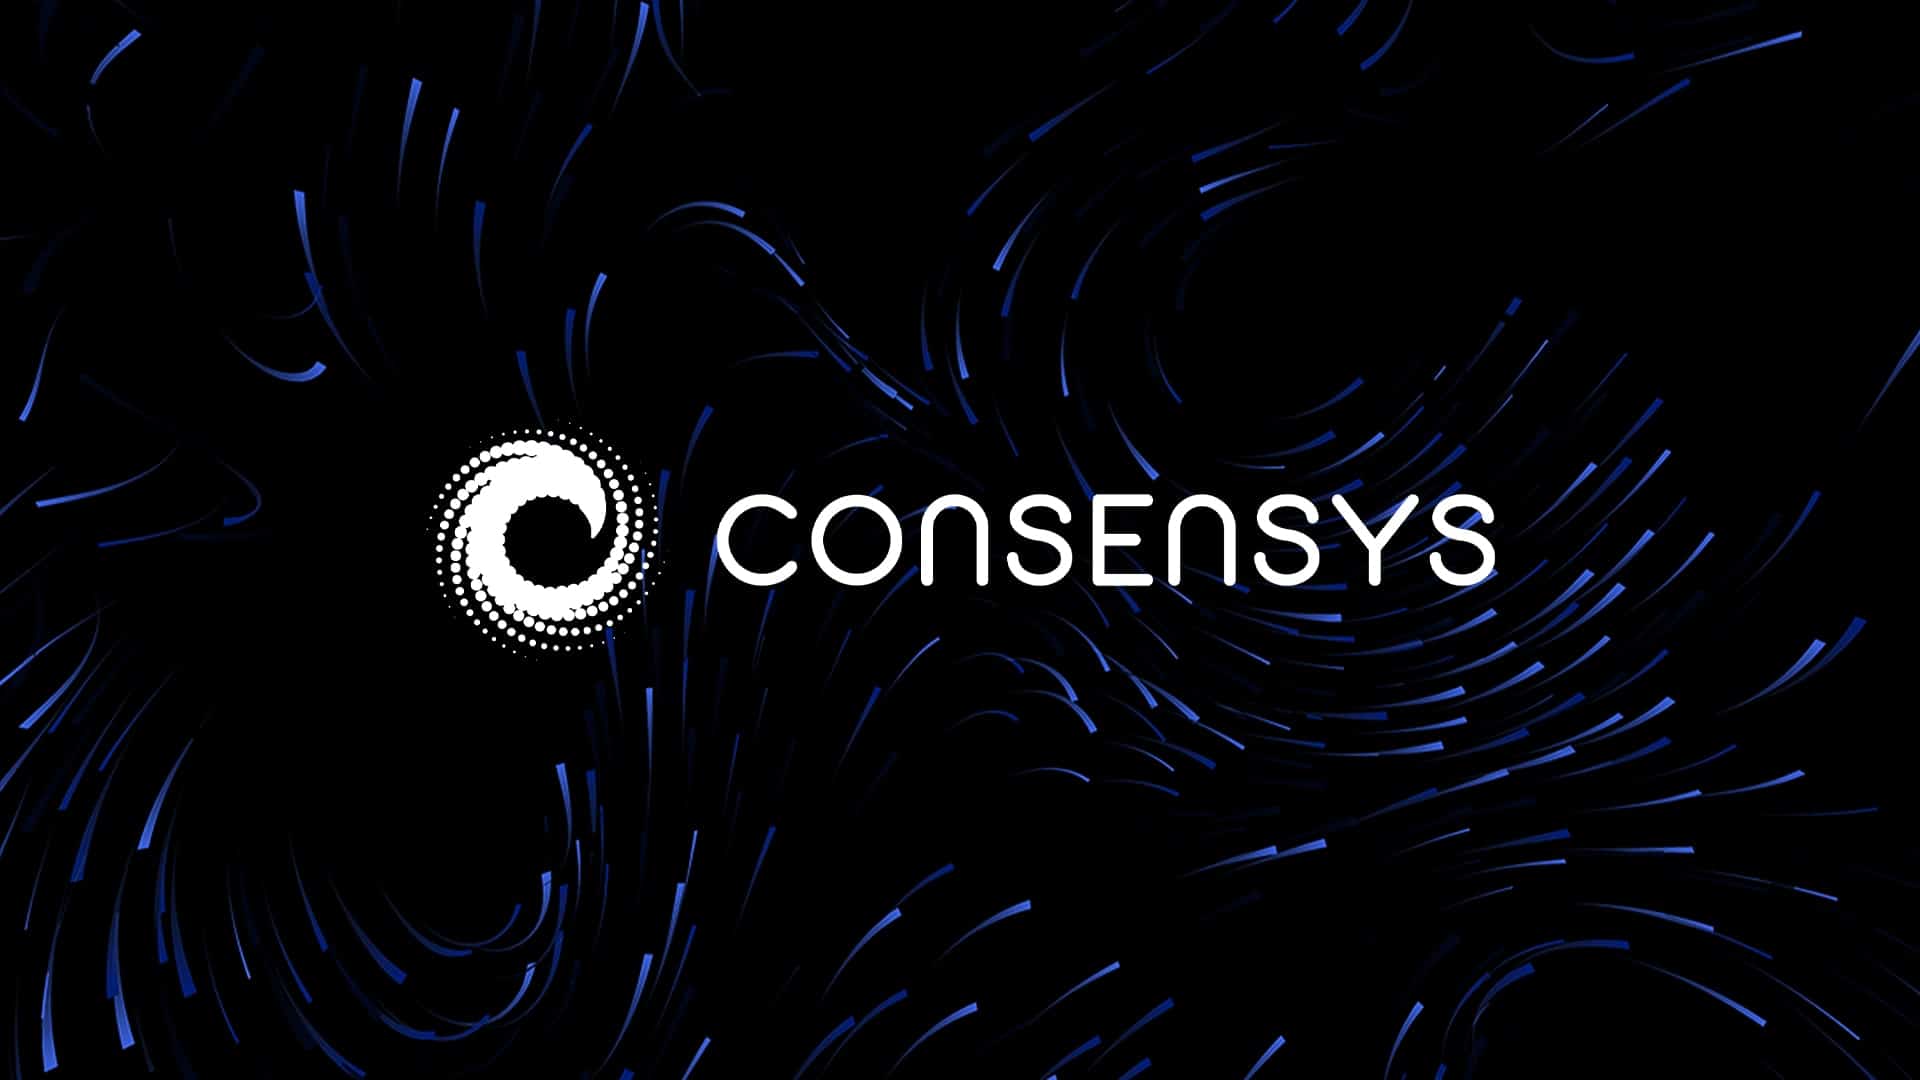 Consensys-partners-with-mastercard-to-launch-rollups-for-evm-blockchains